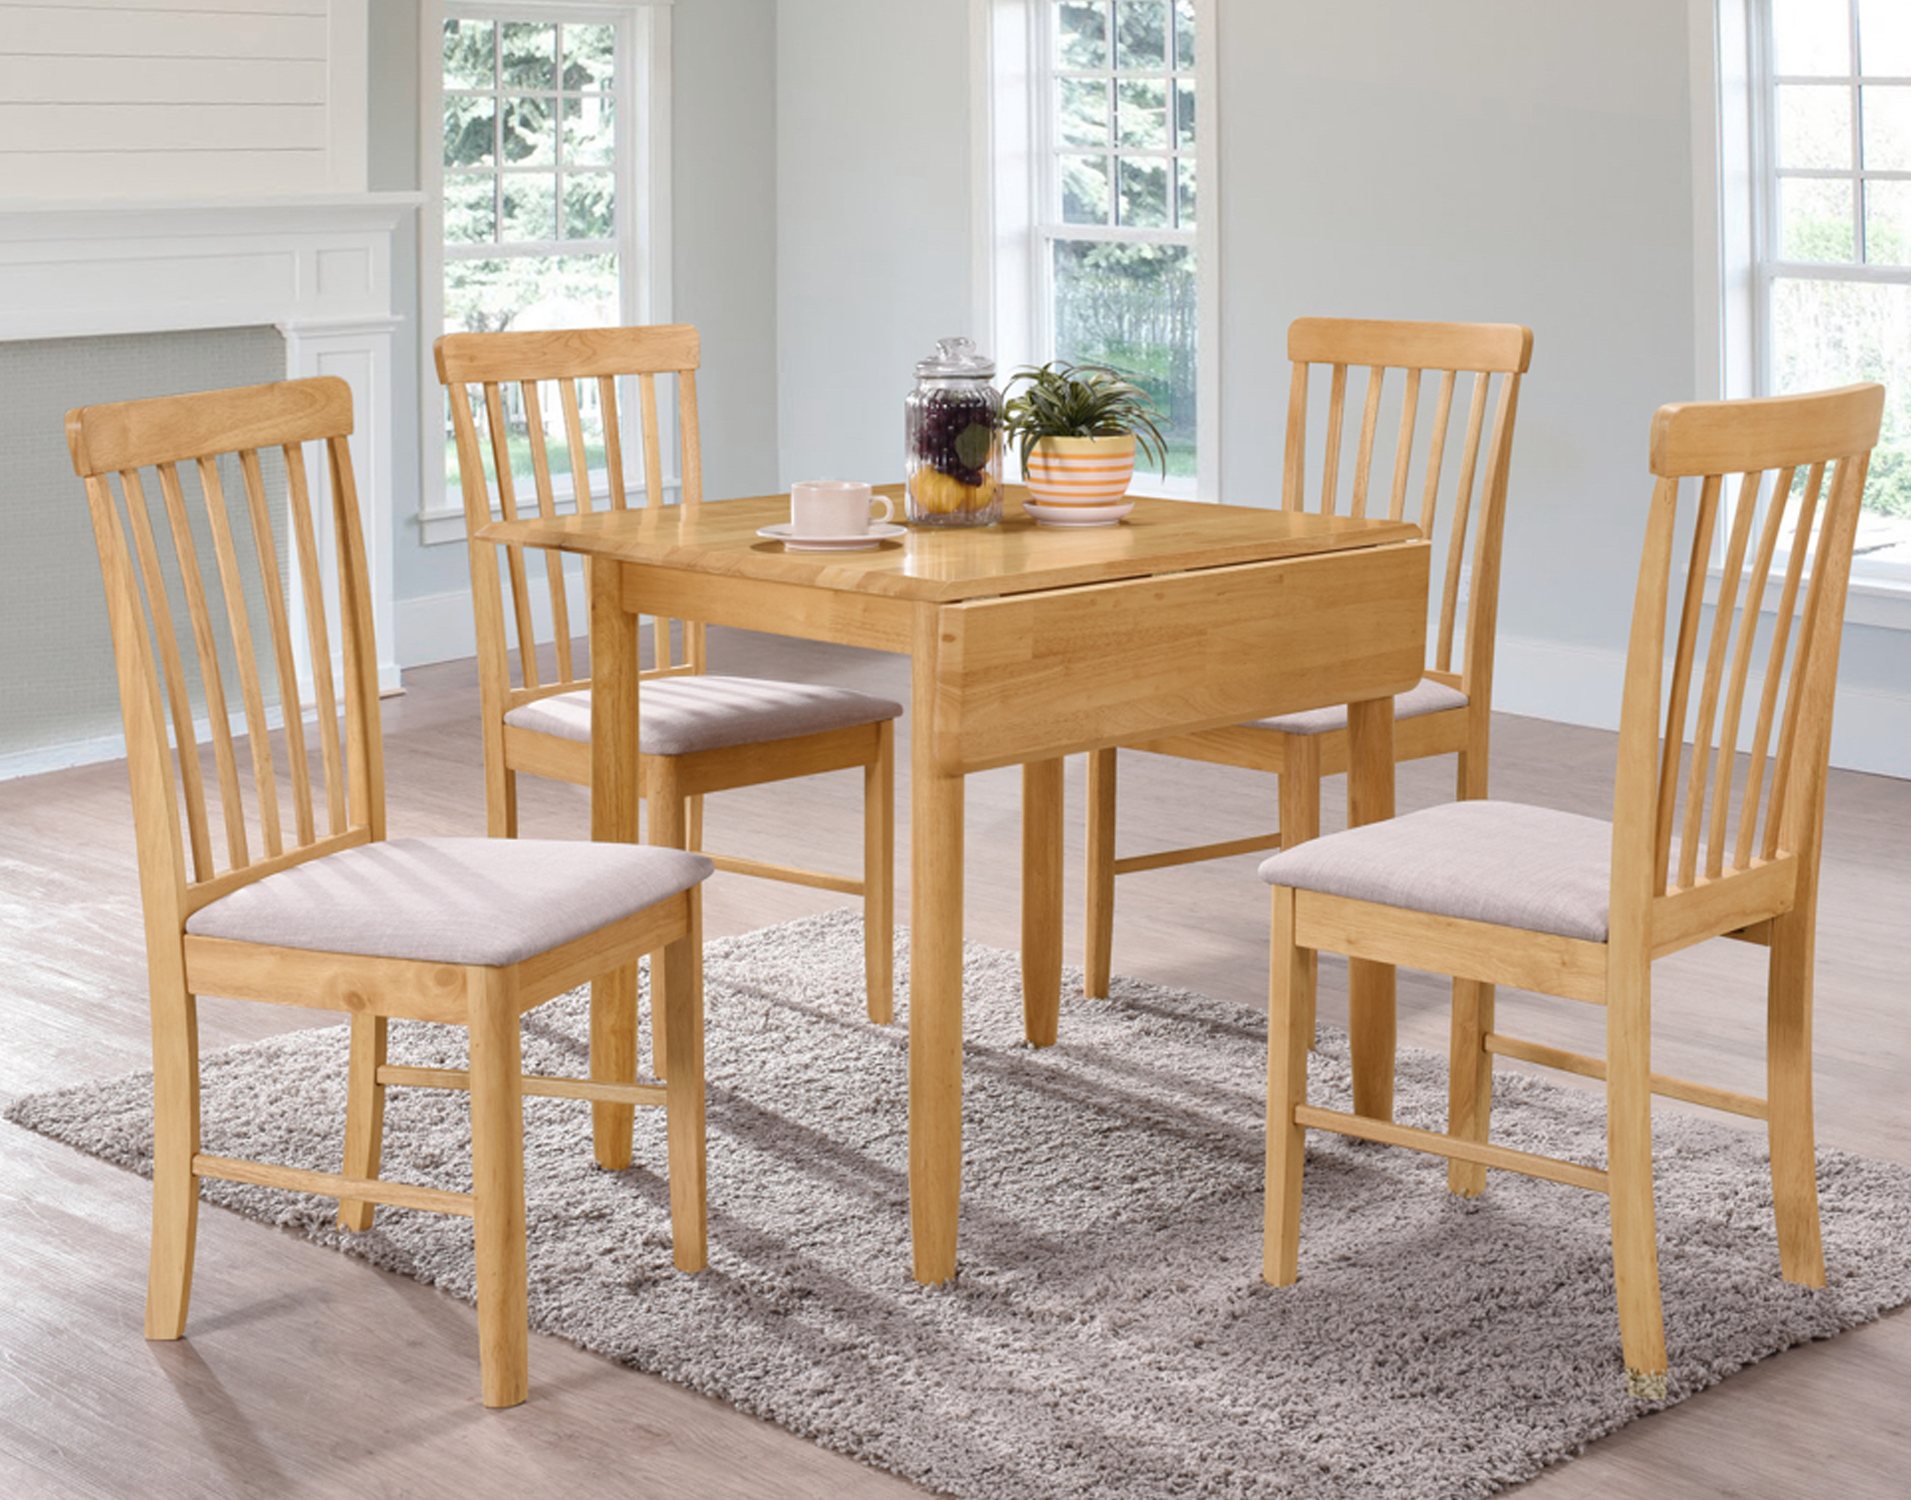 eating table with 4 chair for kitchen